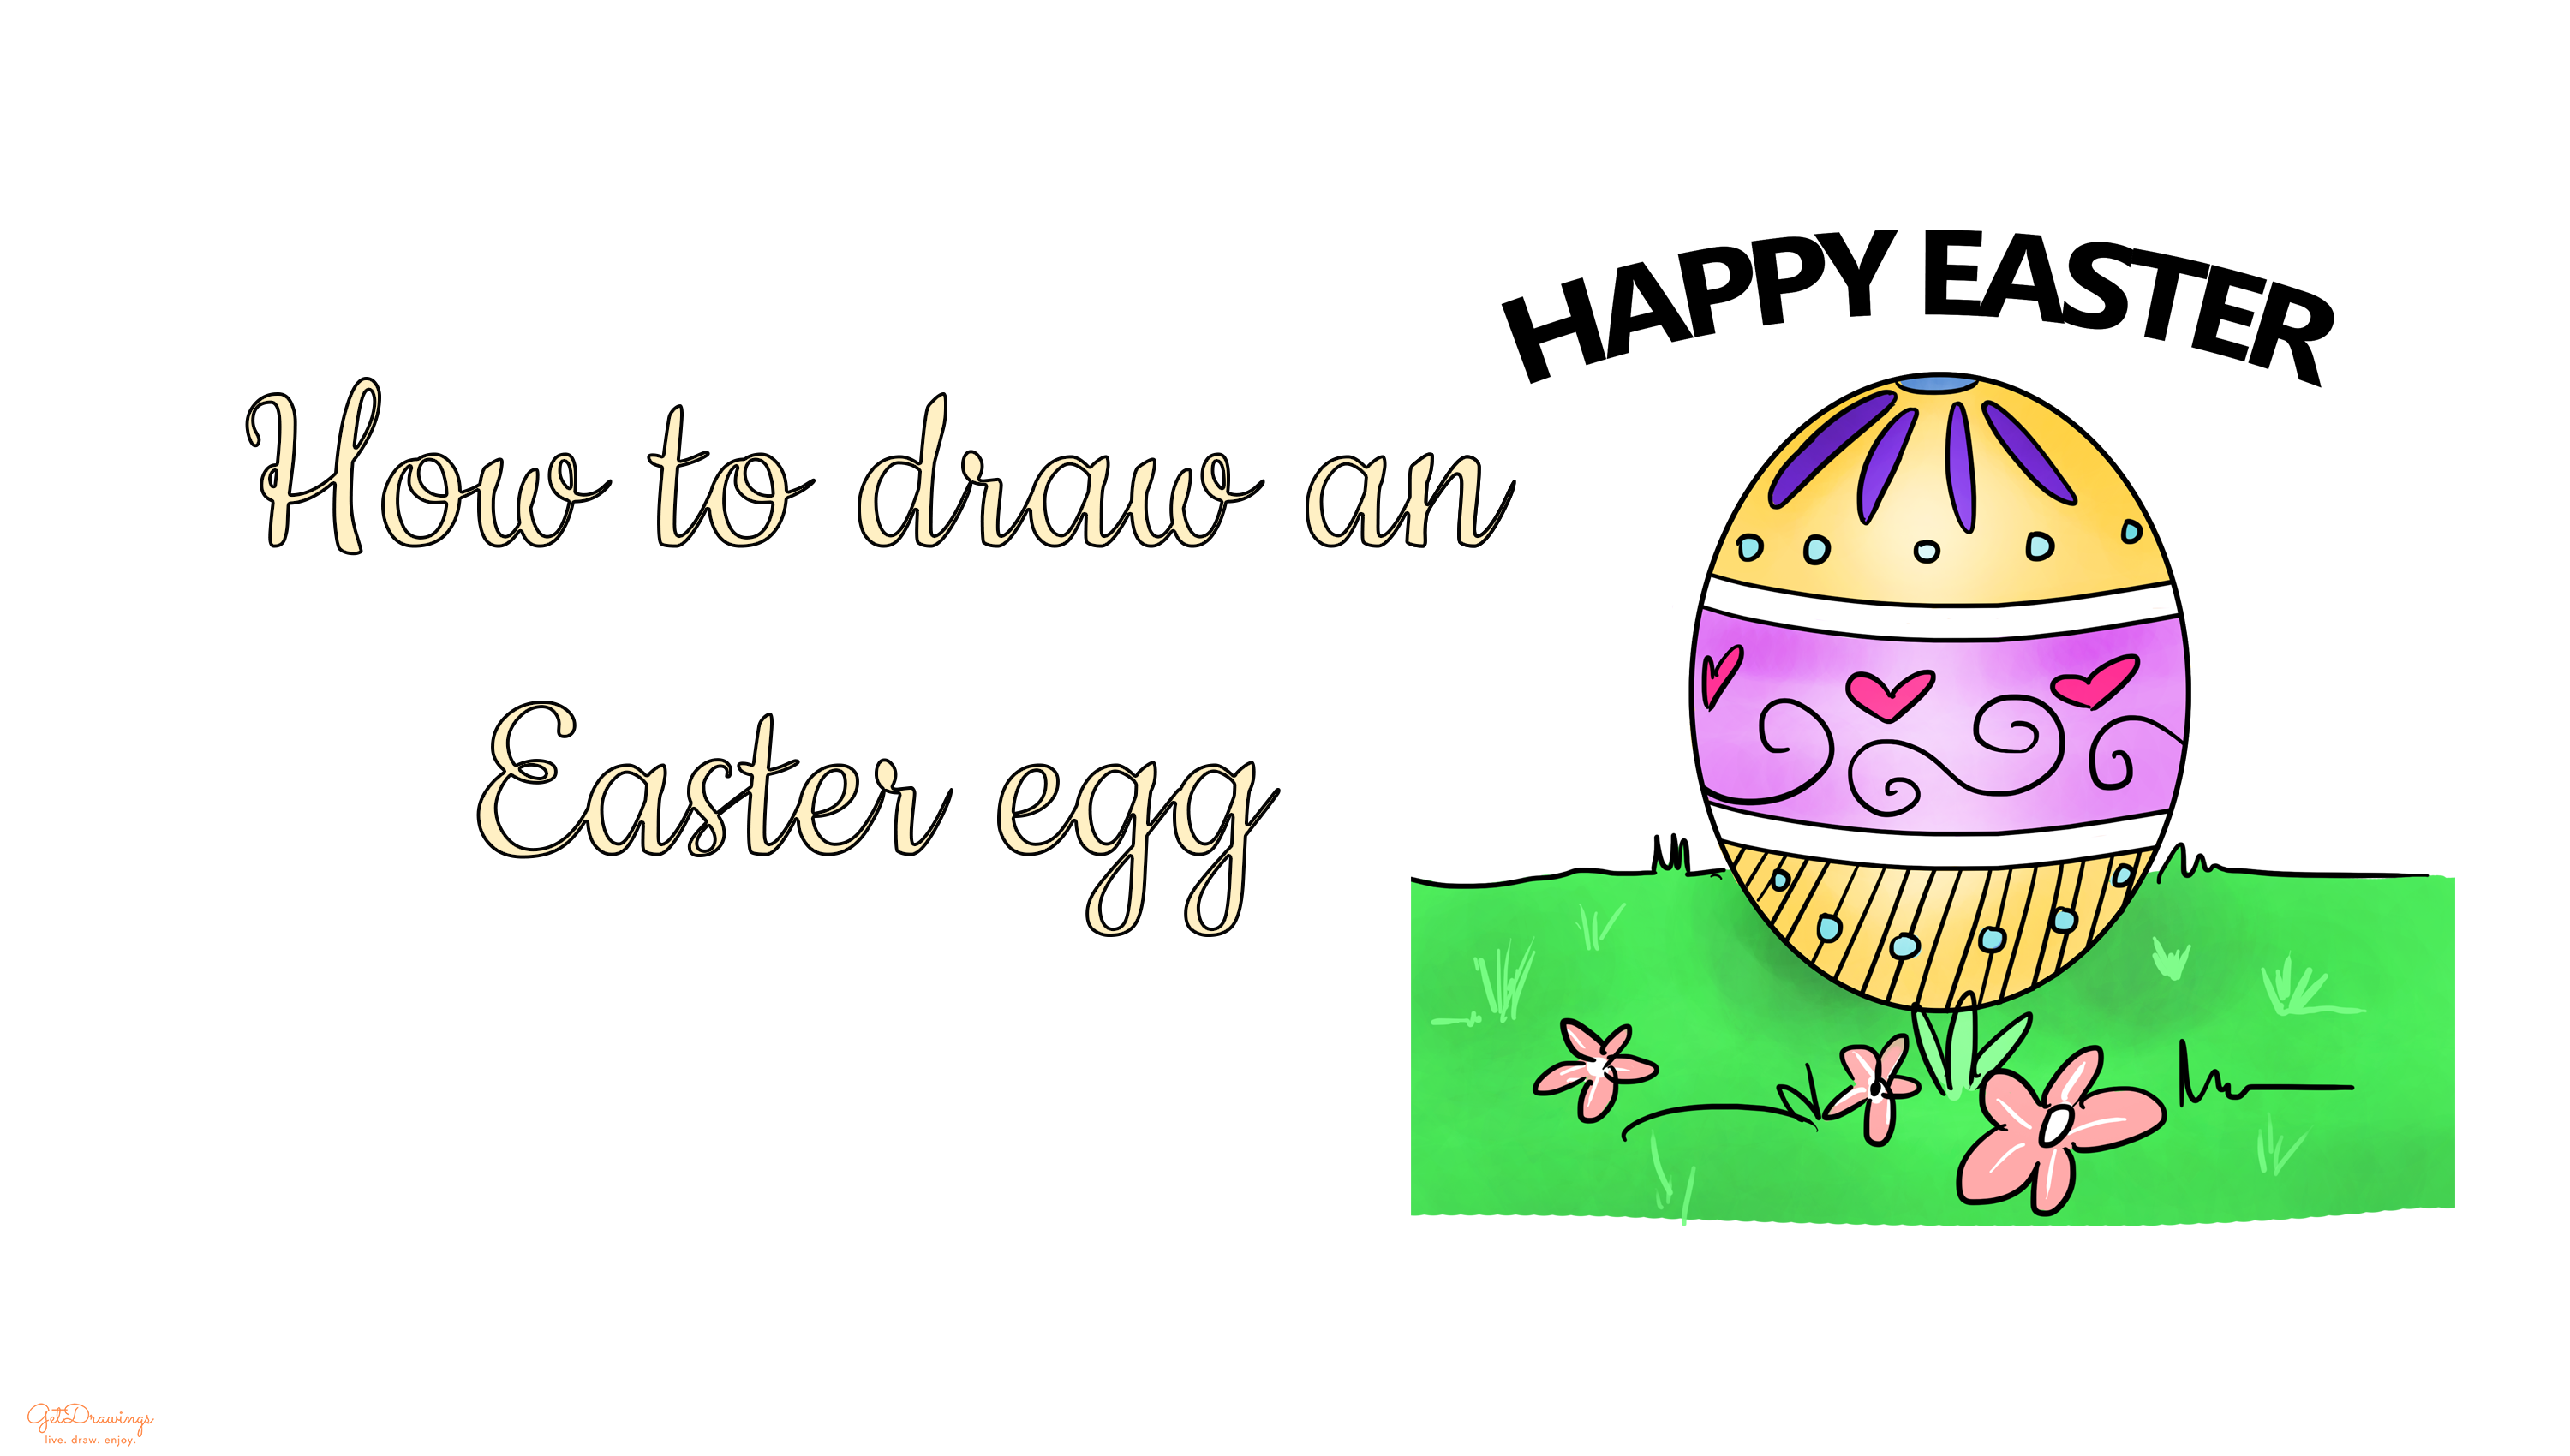 How to draw an Easter Egg?